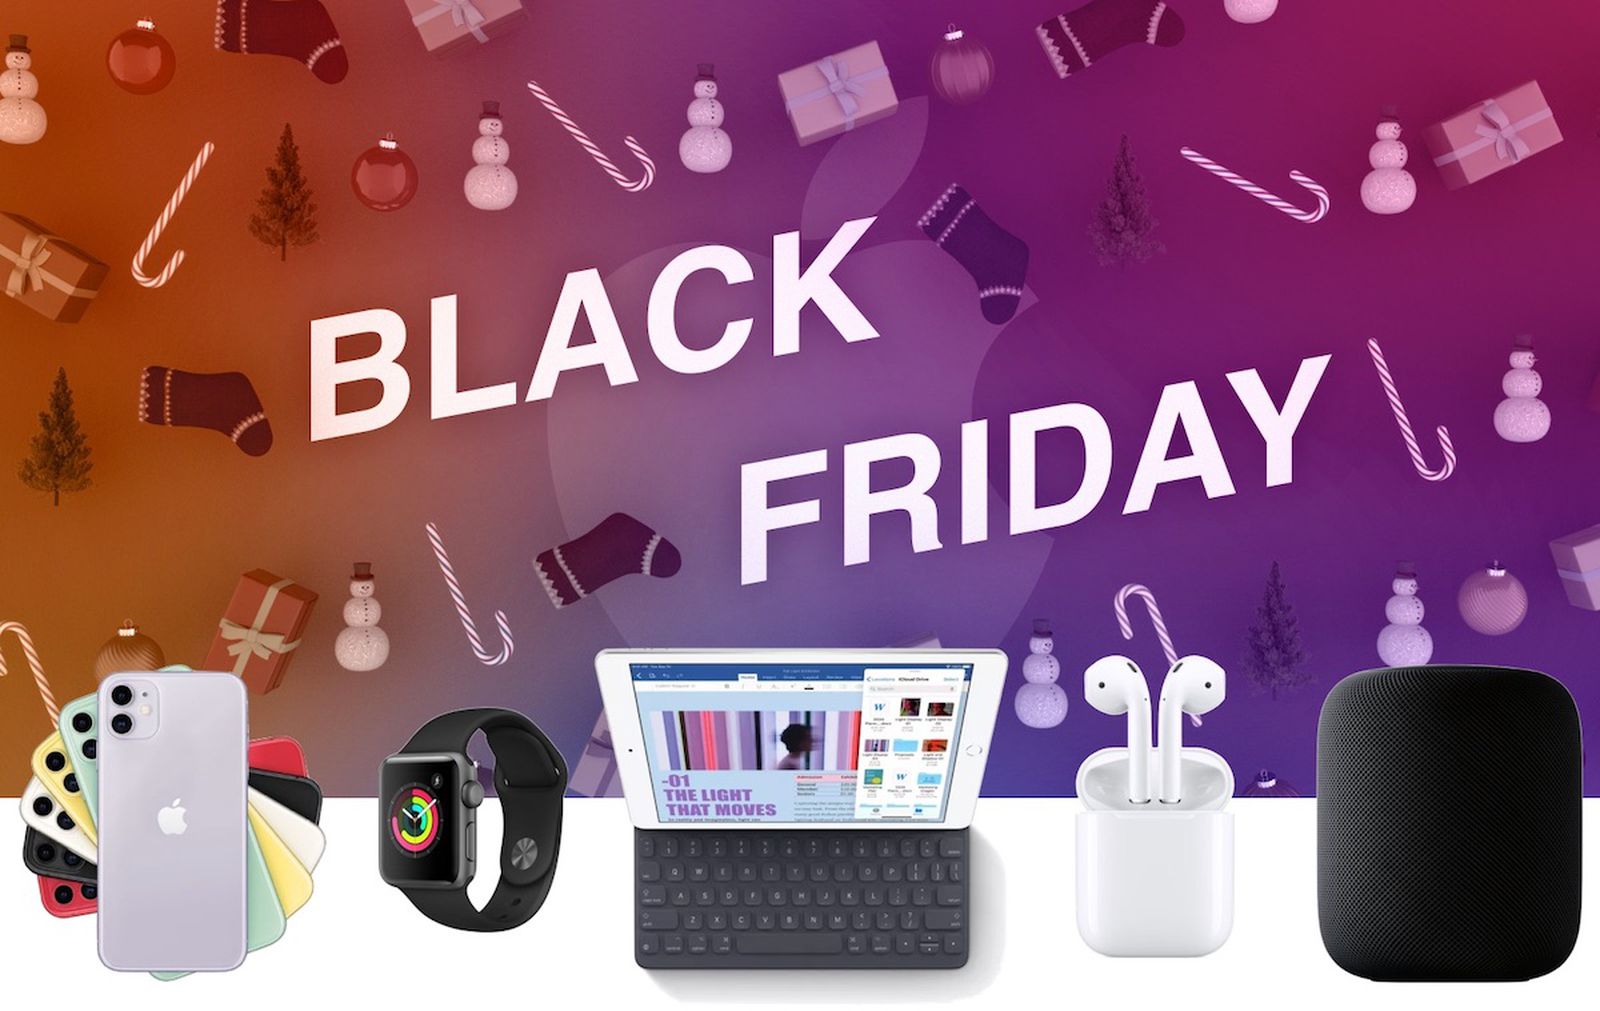 Black Friday 2019: Best Deals on Apple Products Including iPhone